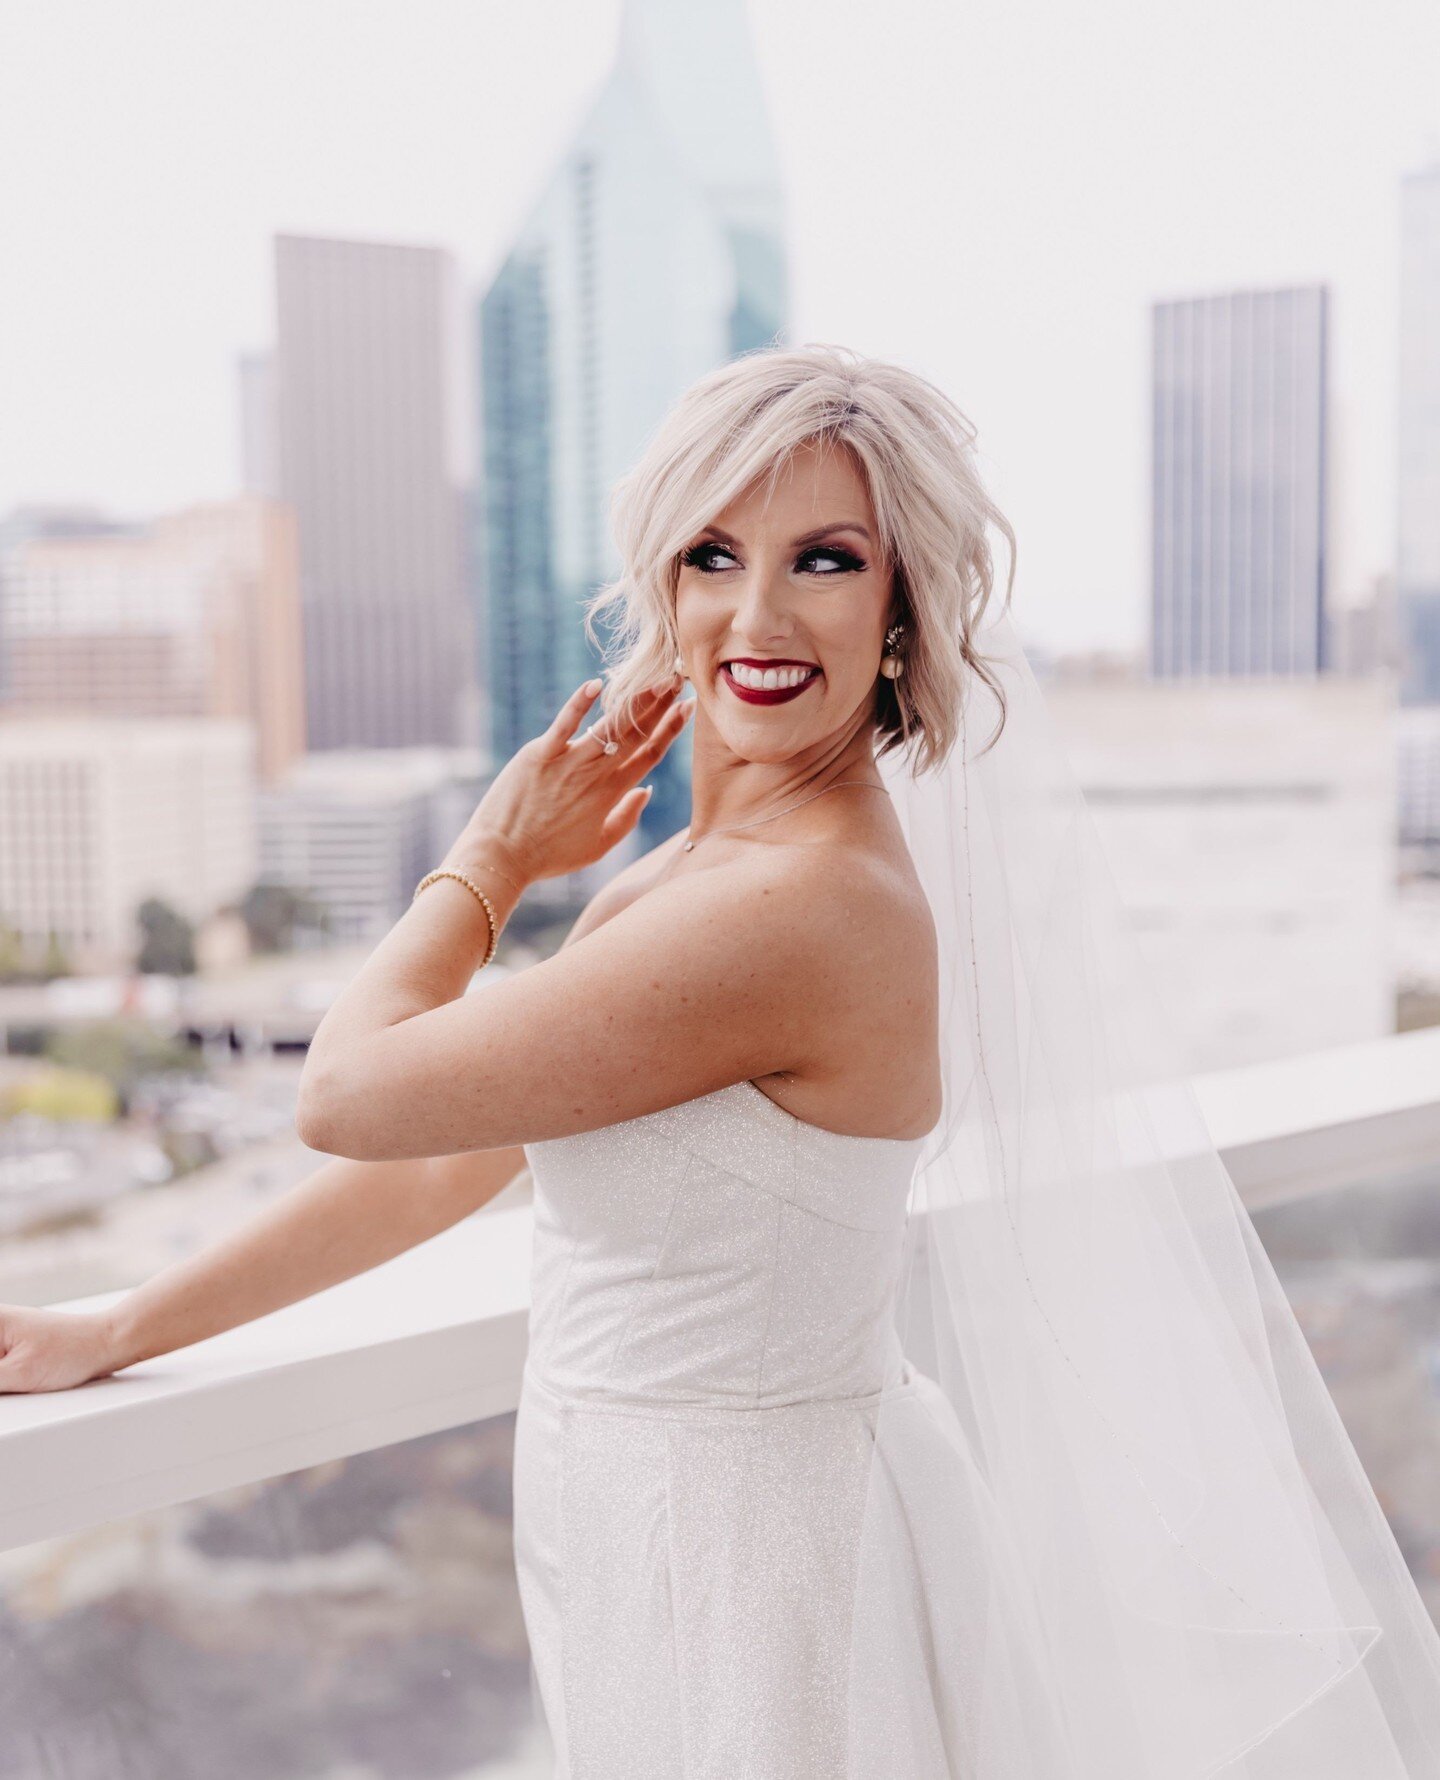 Downtown dreams with a touch of bridal bliss. 🌆💍 When the city skyline meets bridal chic, magic happens! ⁠
⁠